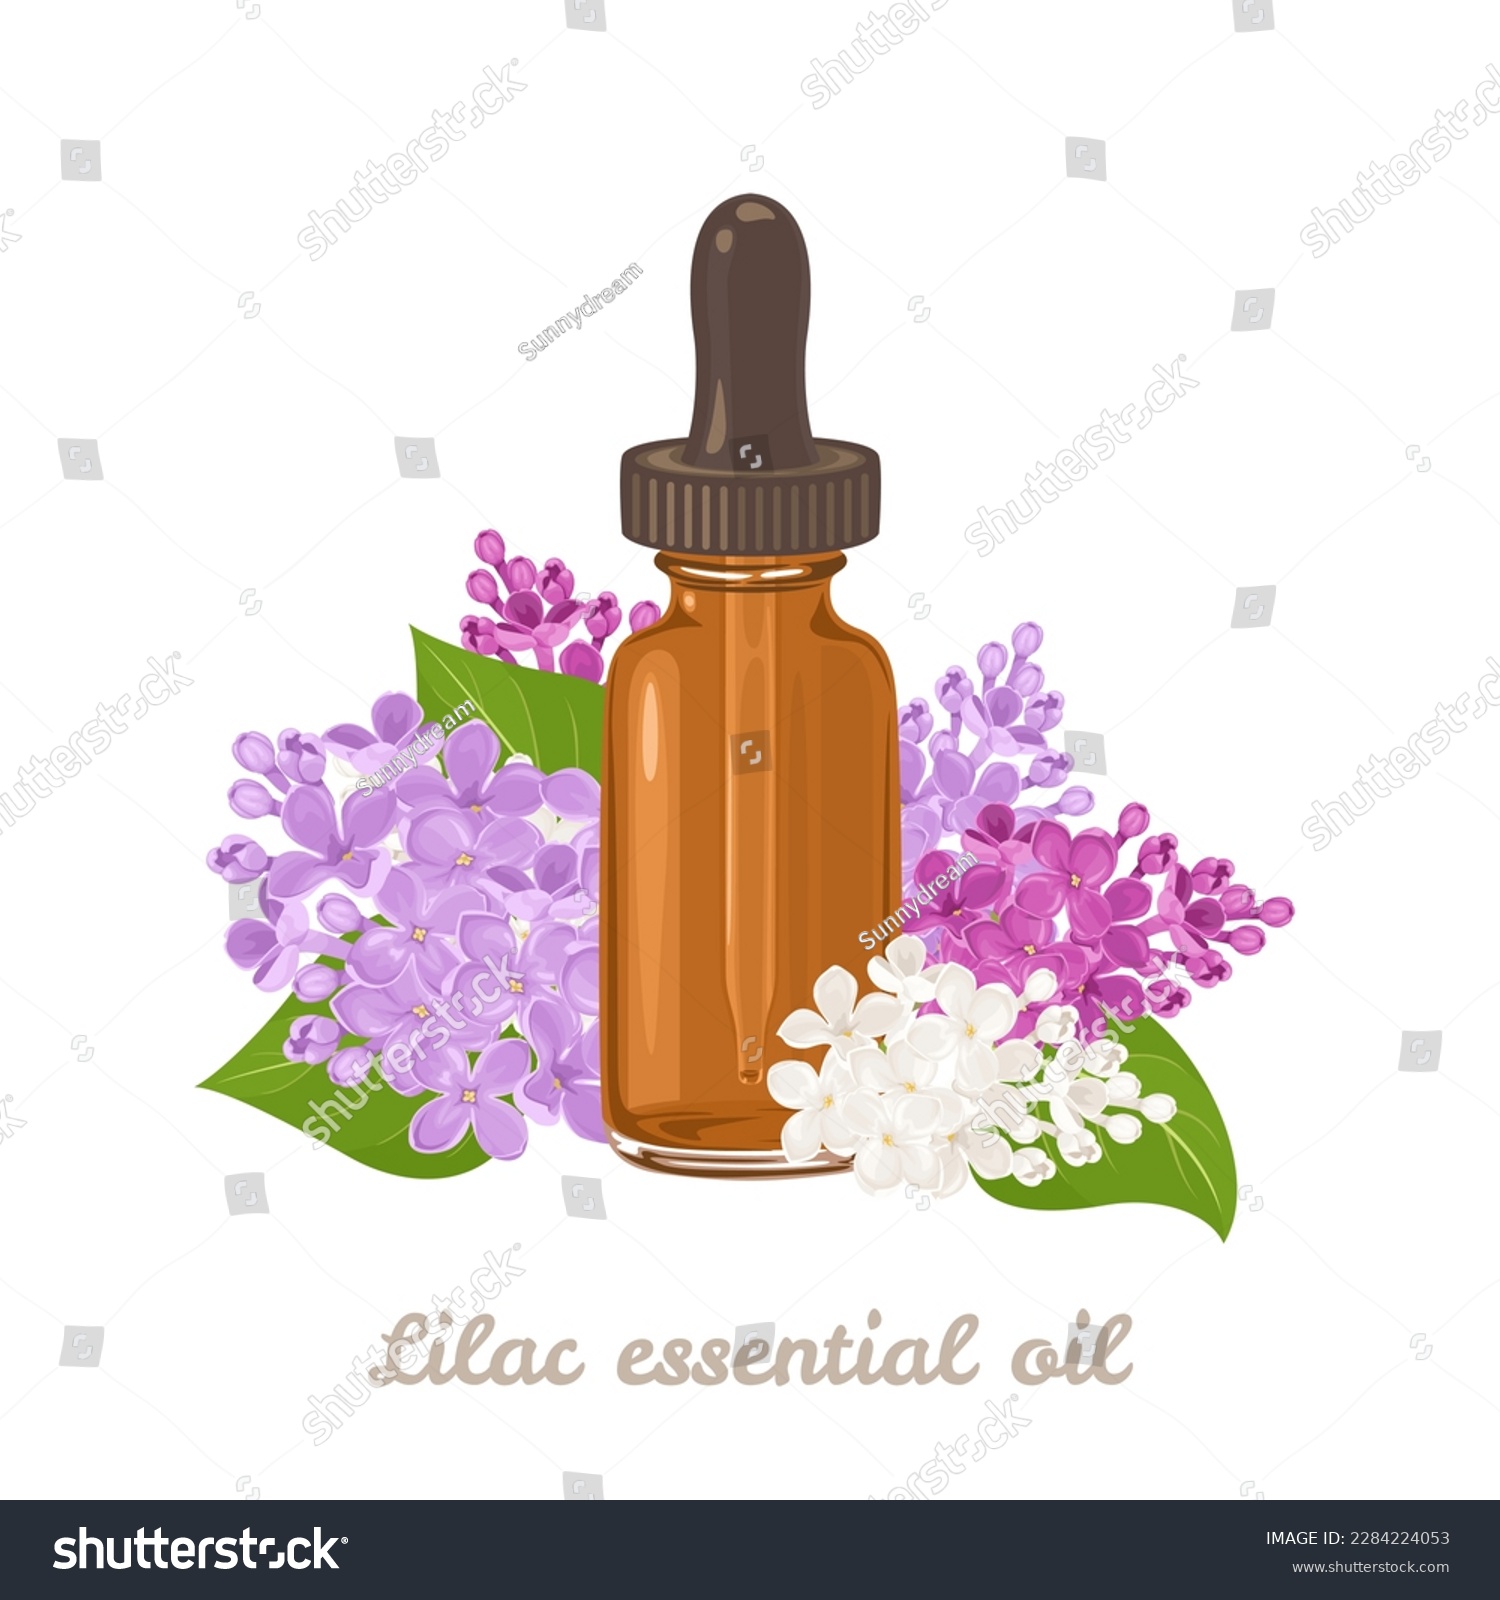 Essential oil of lilac flowers. Amber glass dropper bottle  and flowers isolated on white background. Vector illustration in cartoon flat style. #2284224053